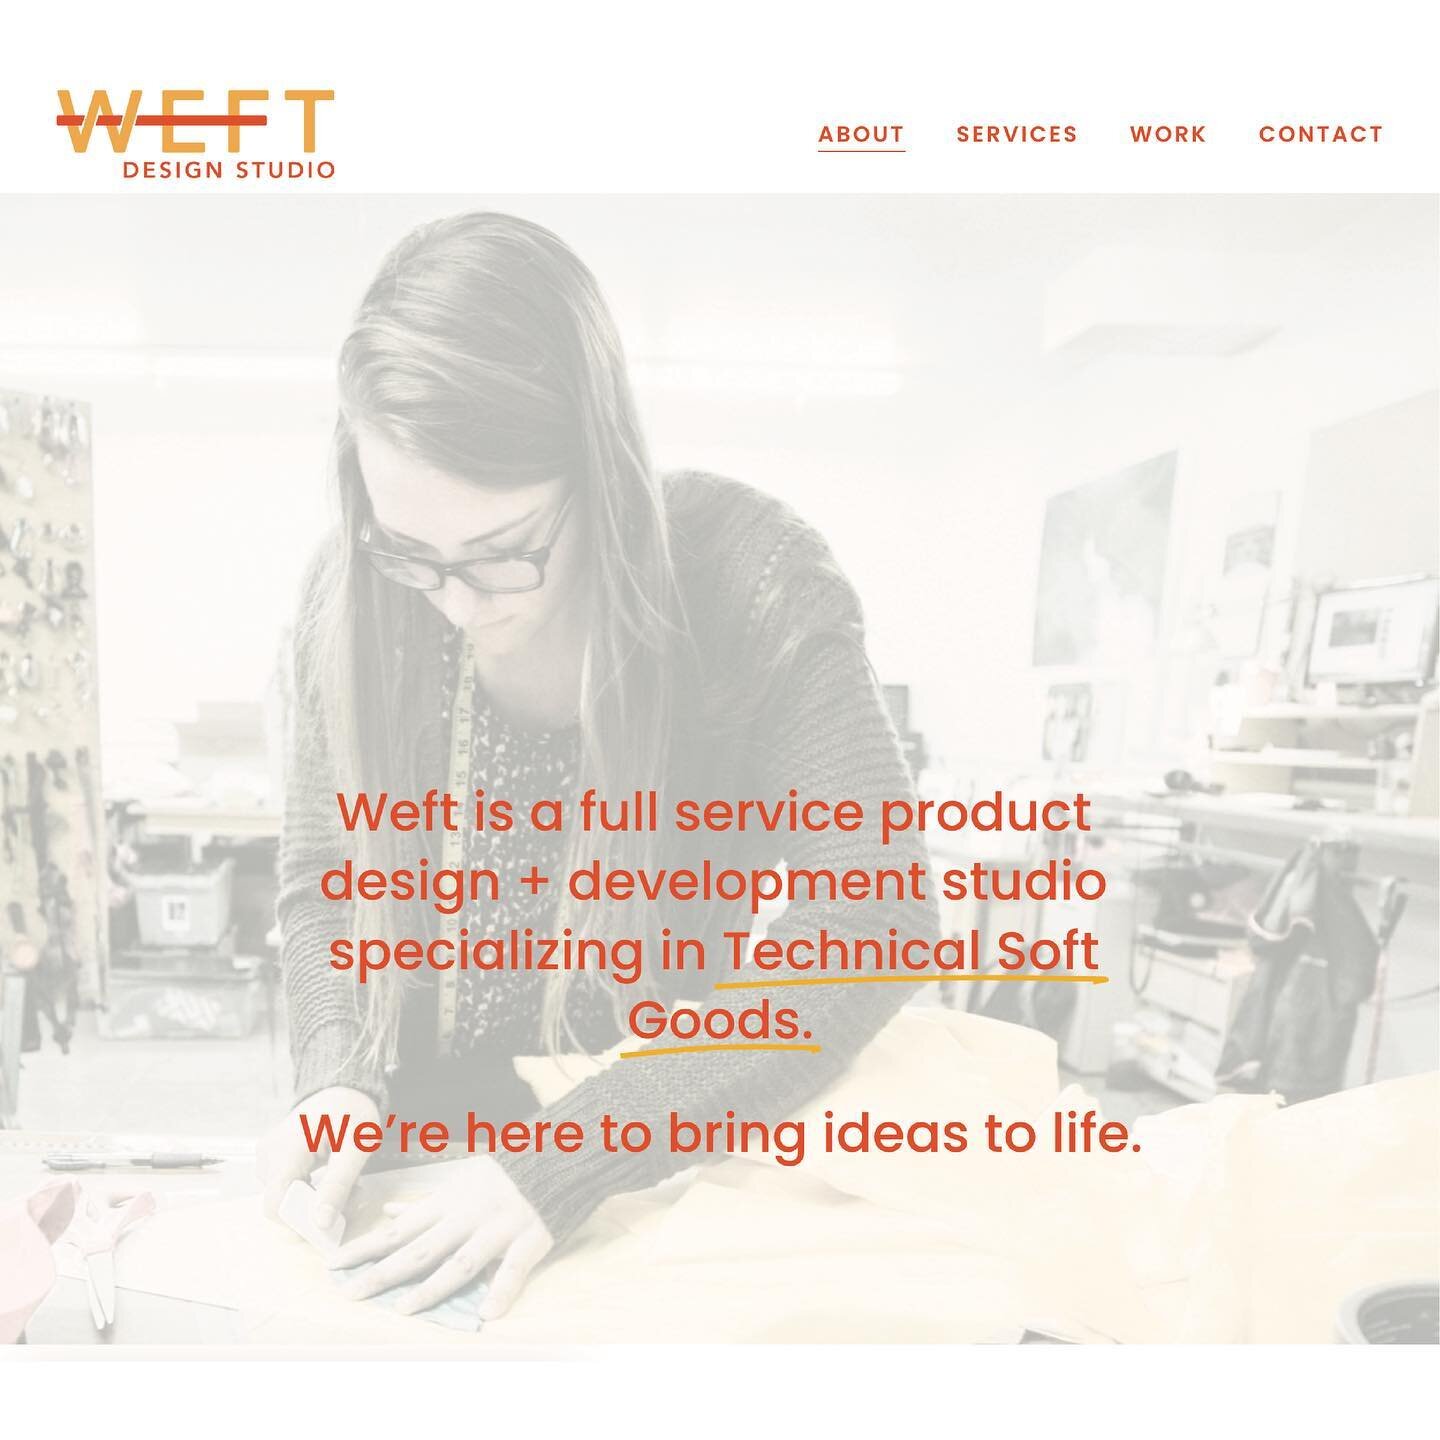 Introducing Weft Design!

This has been in the works for the last year or so, but the last few months I&rsquo;ve been full time building this business and more importantly designing + developing some rad products. I&rsquo;m super excited to share the